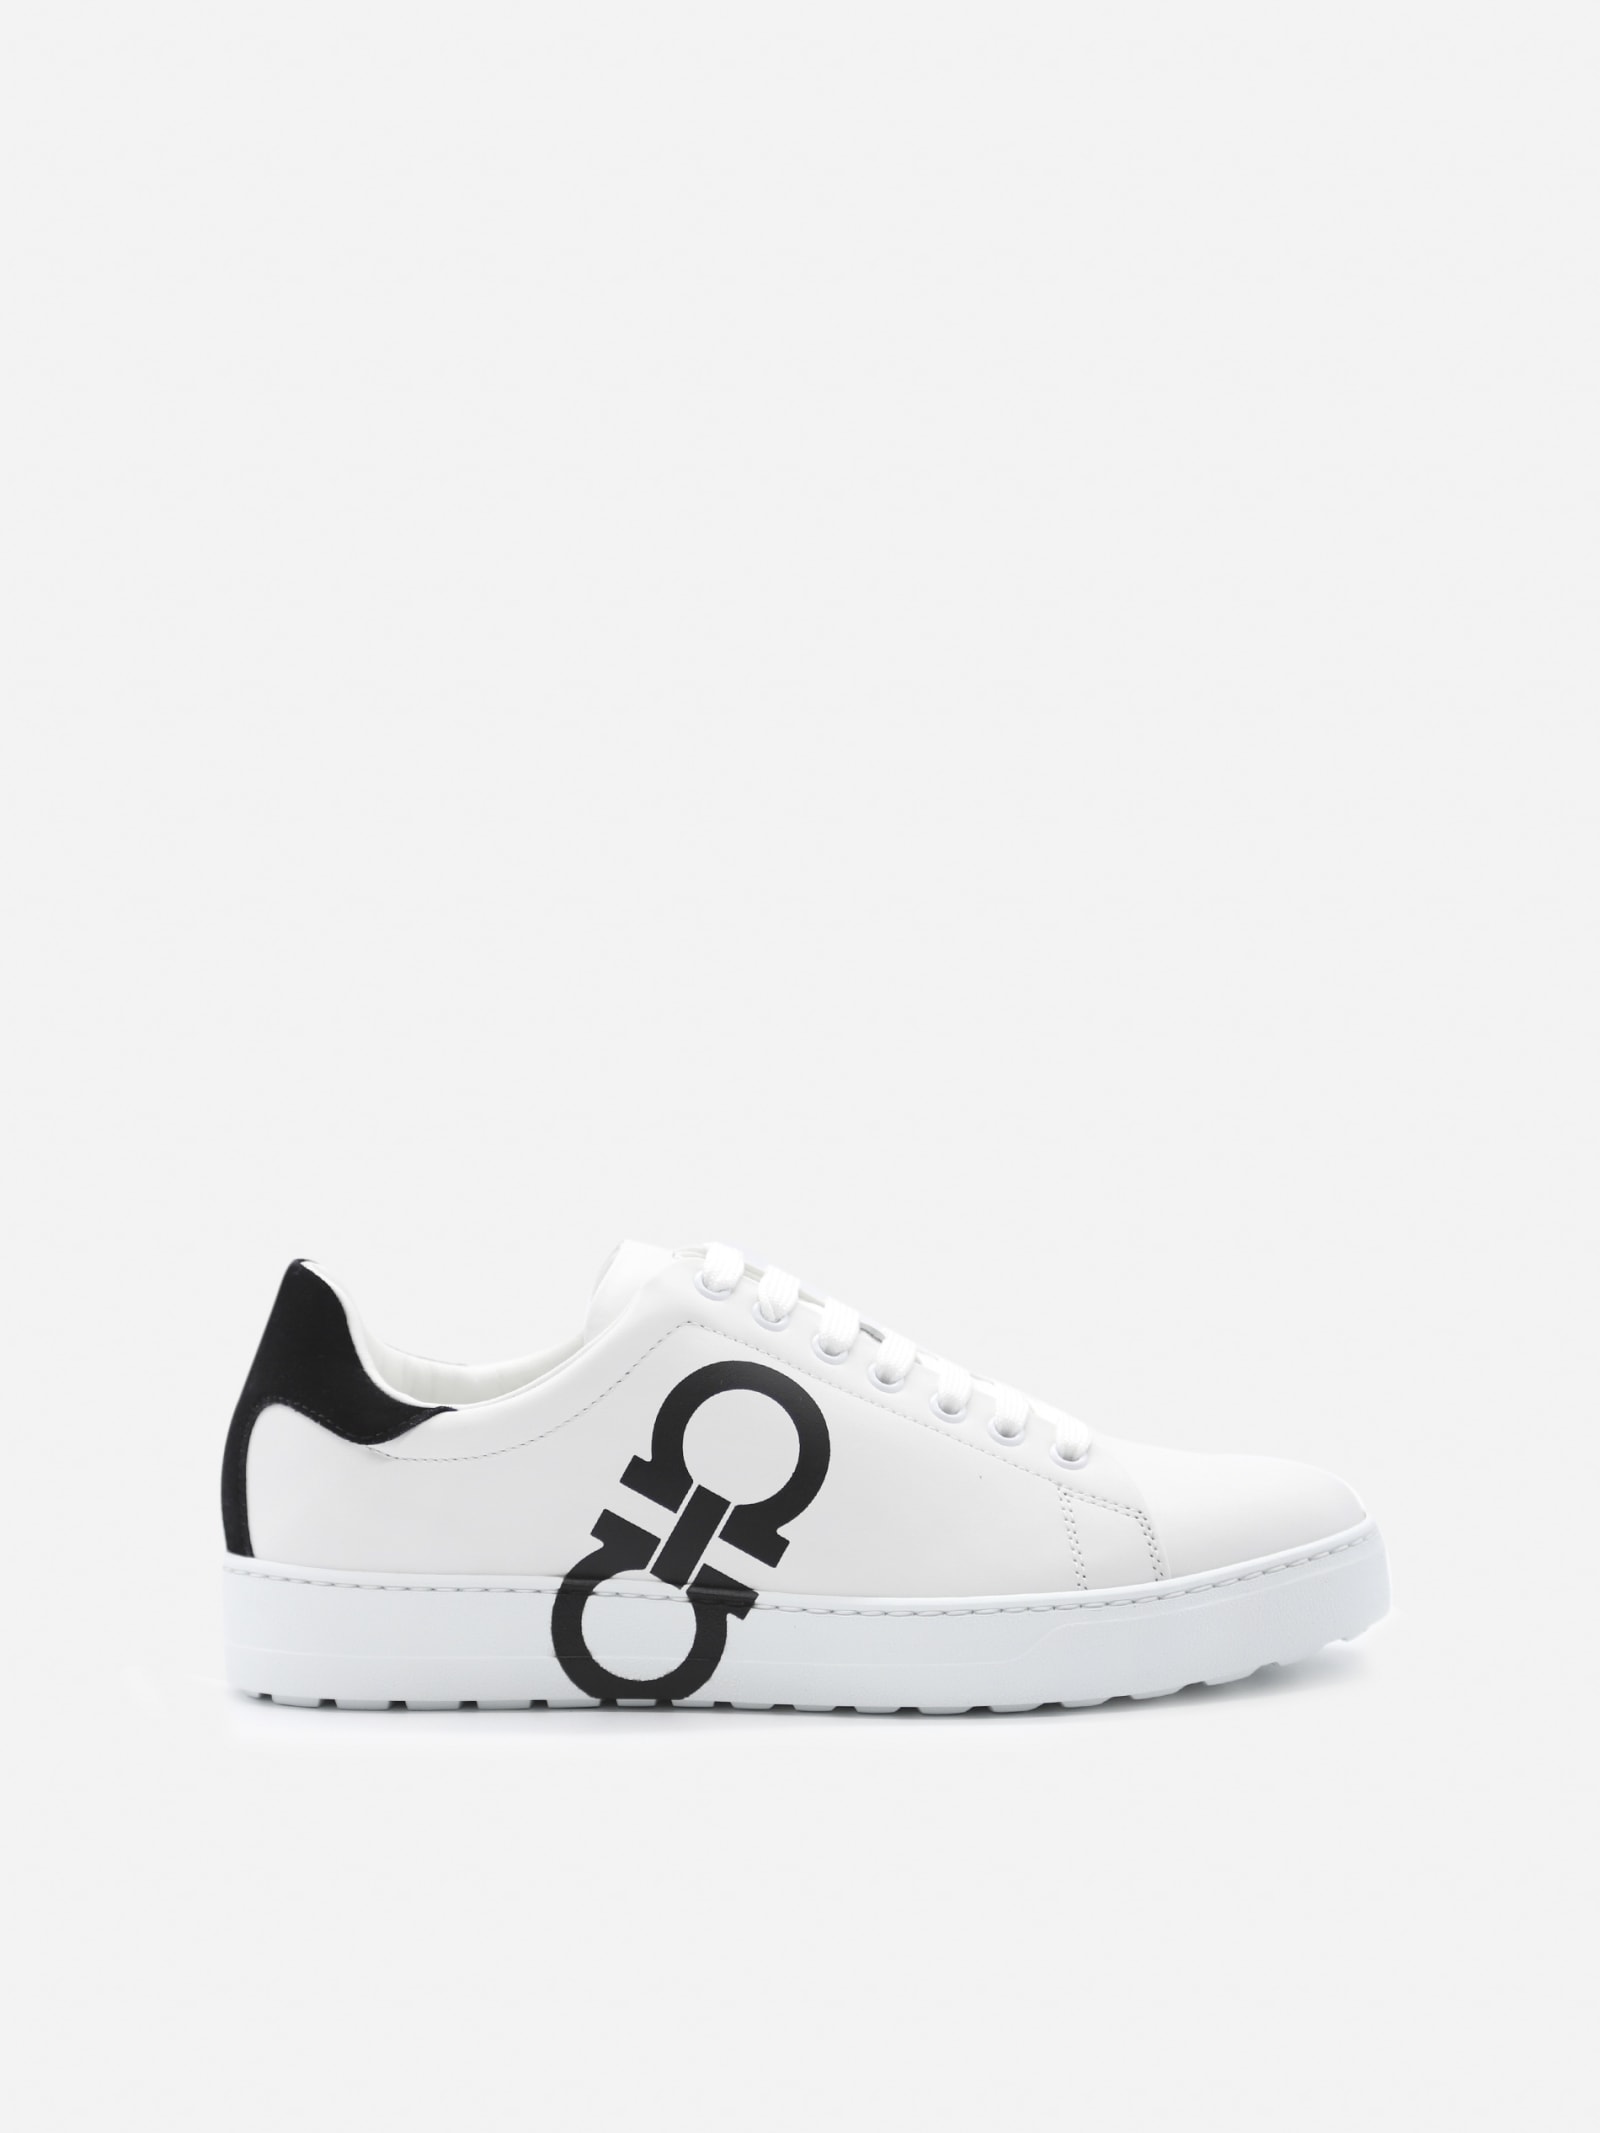 Salvatore Ferragamo Gancini Sneakers In Leather With Contrasting Print